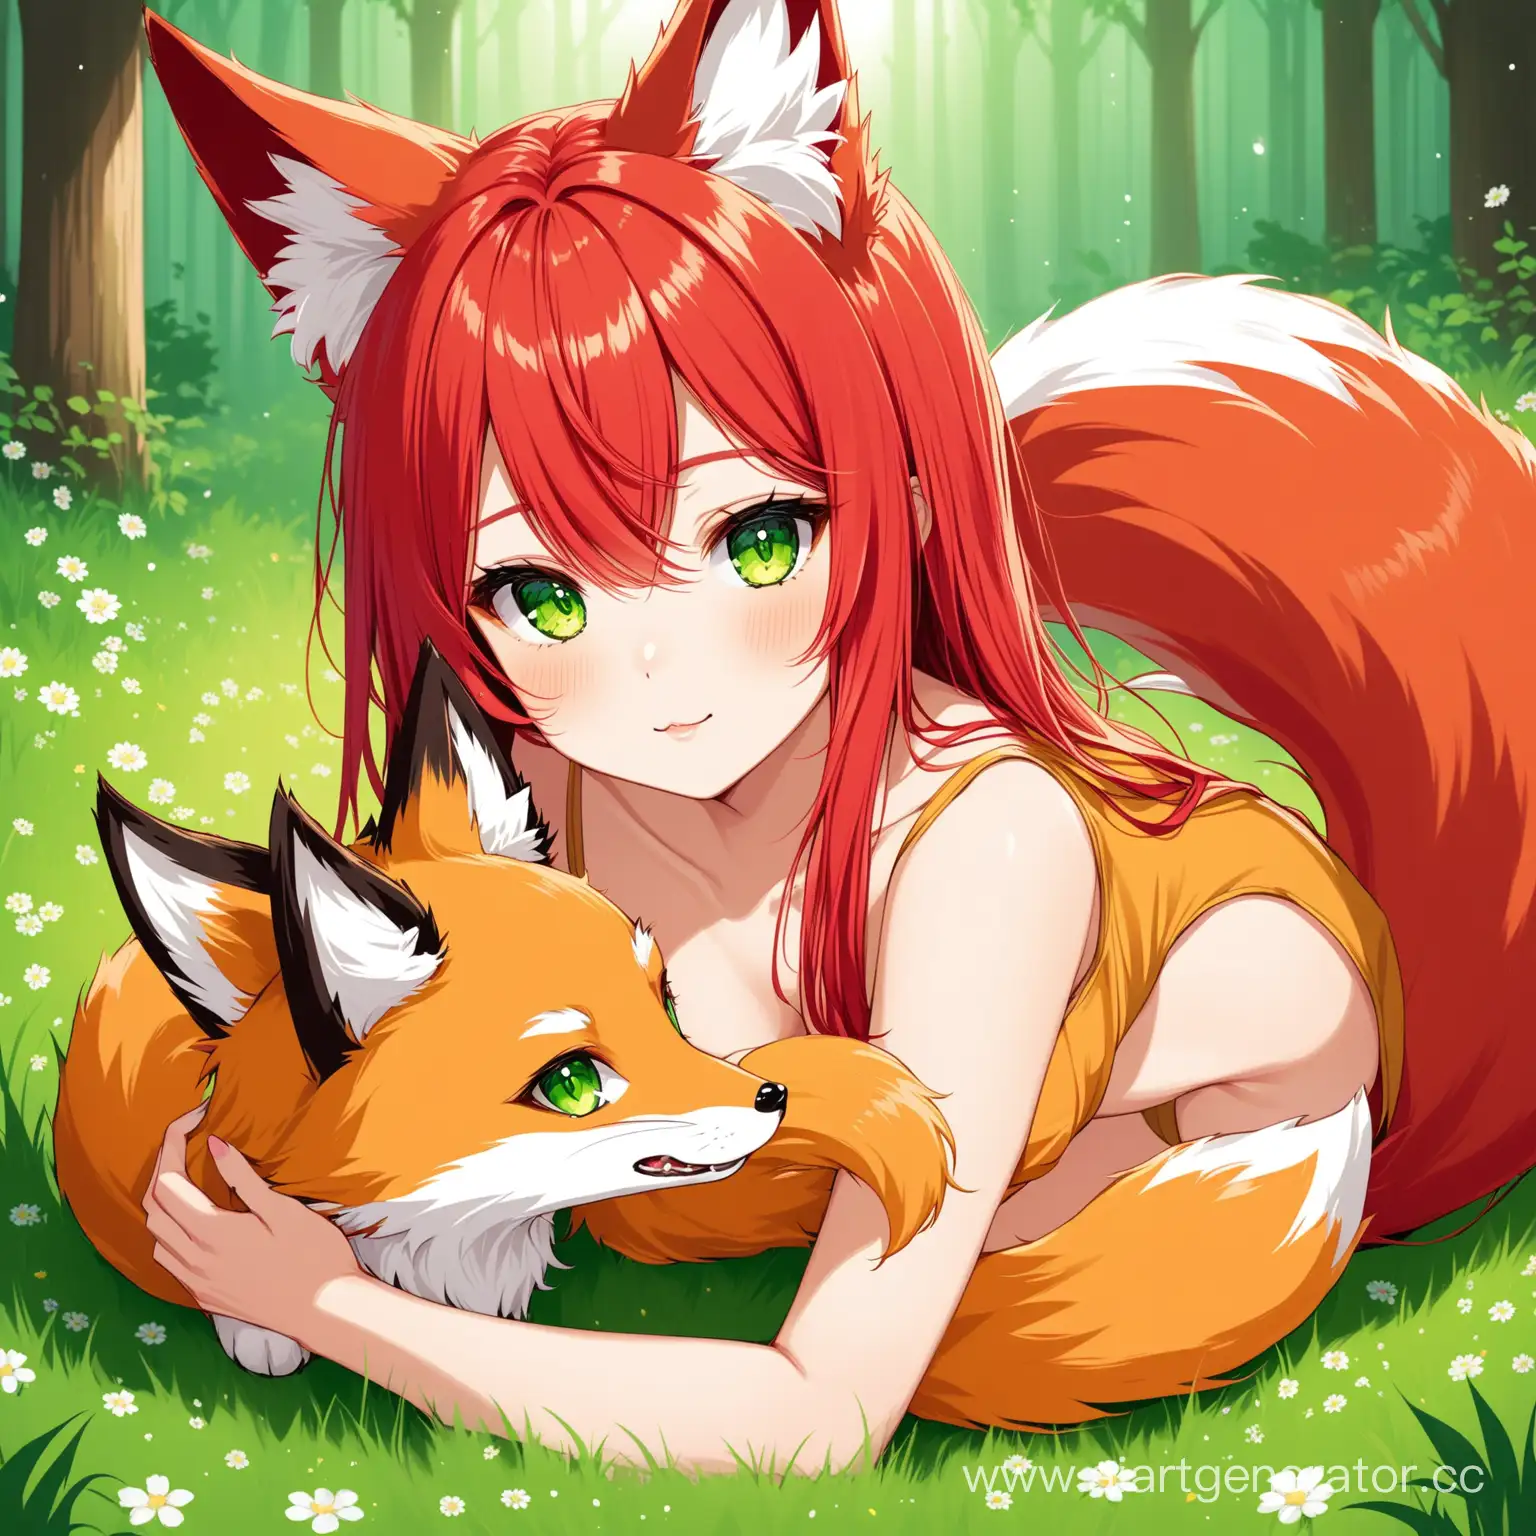 RedHaired-Girl-with-Fox-Ears-and-Pet-Fox